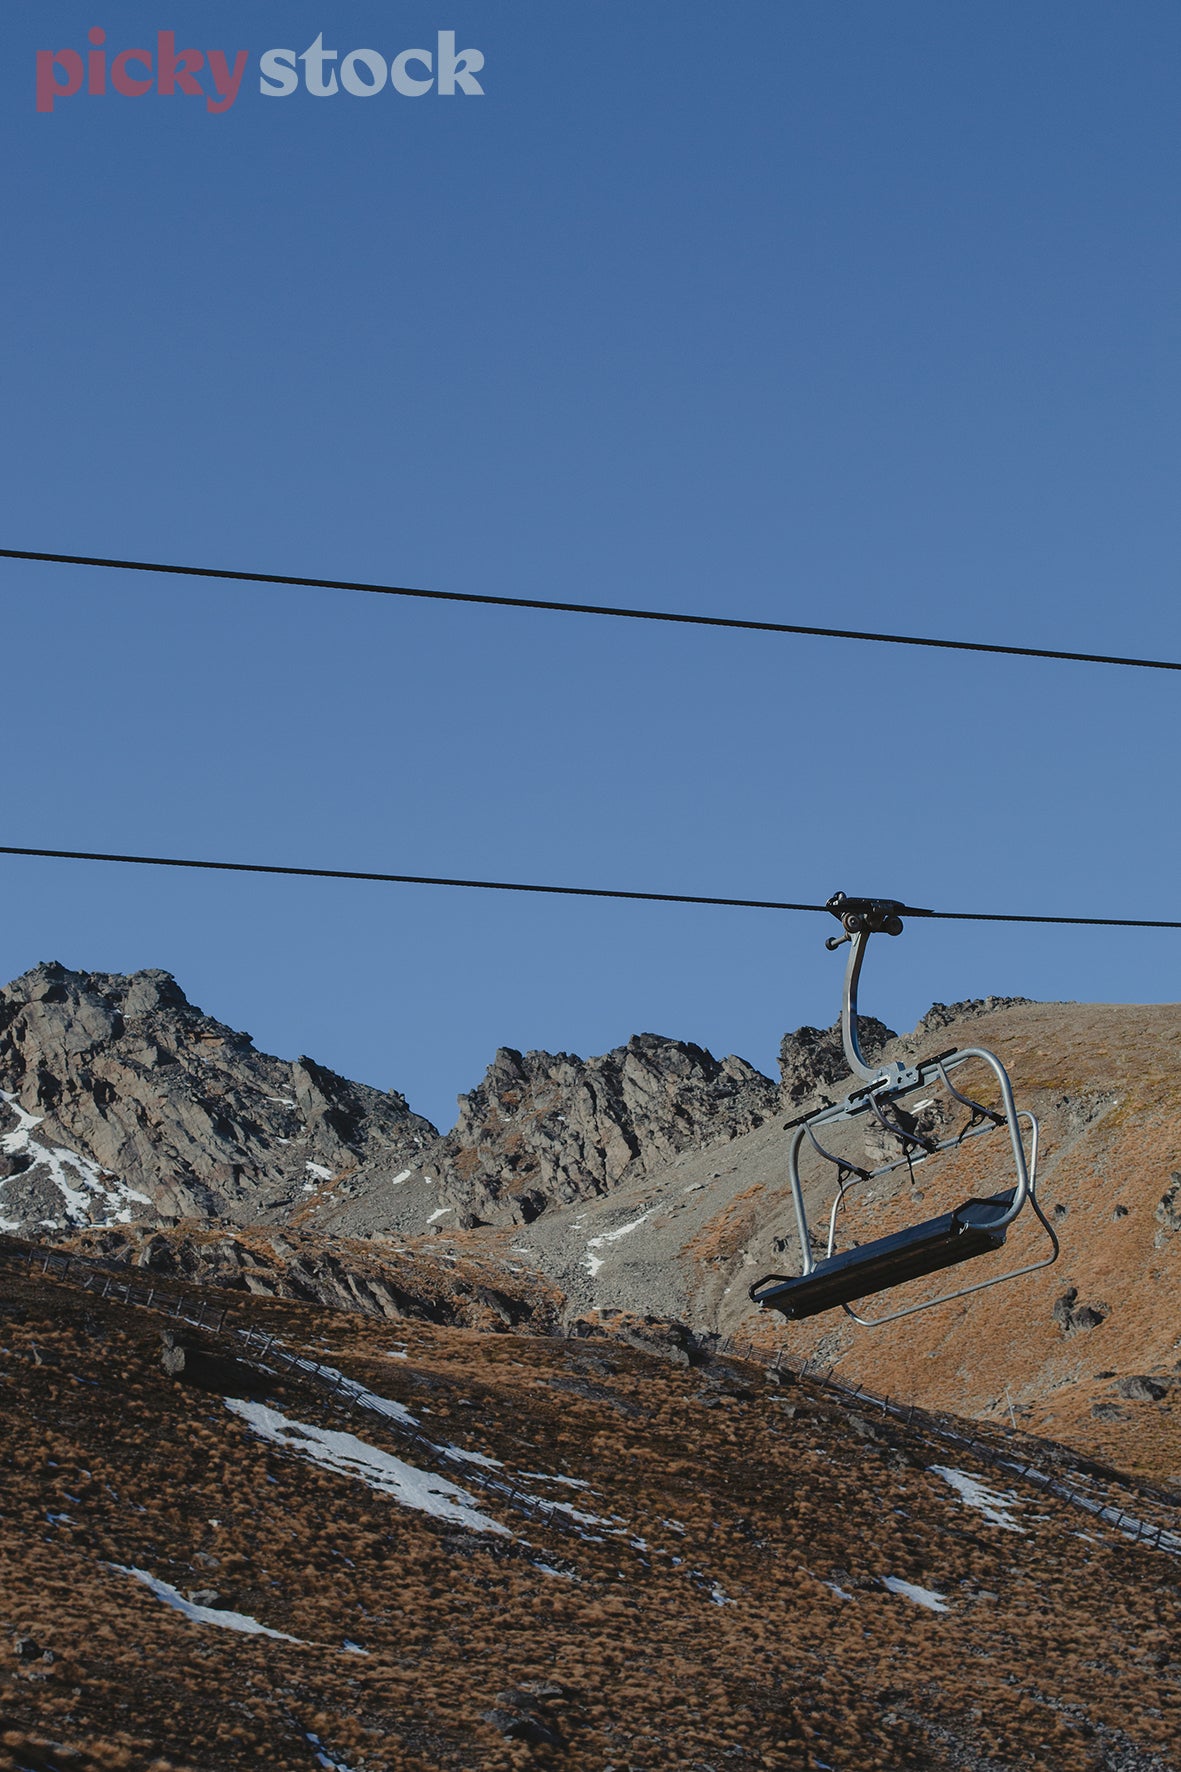 Ski field in summer. Only small patches of snow remaining. Single chair lift and cabling to the right of frame. Bright blue sky.